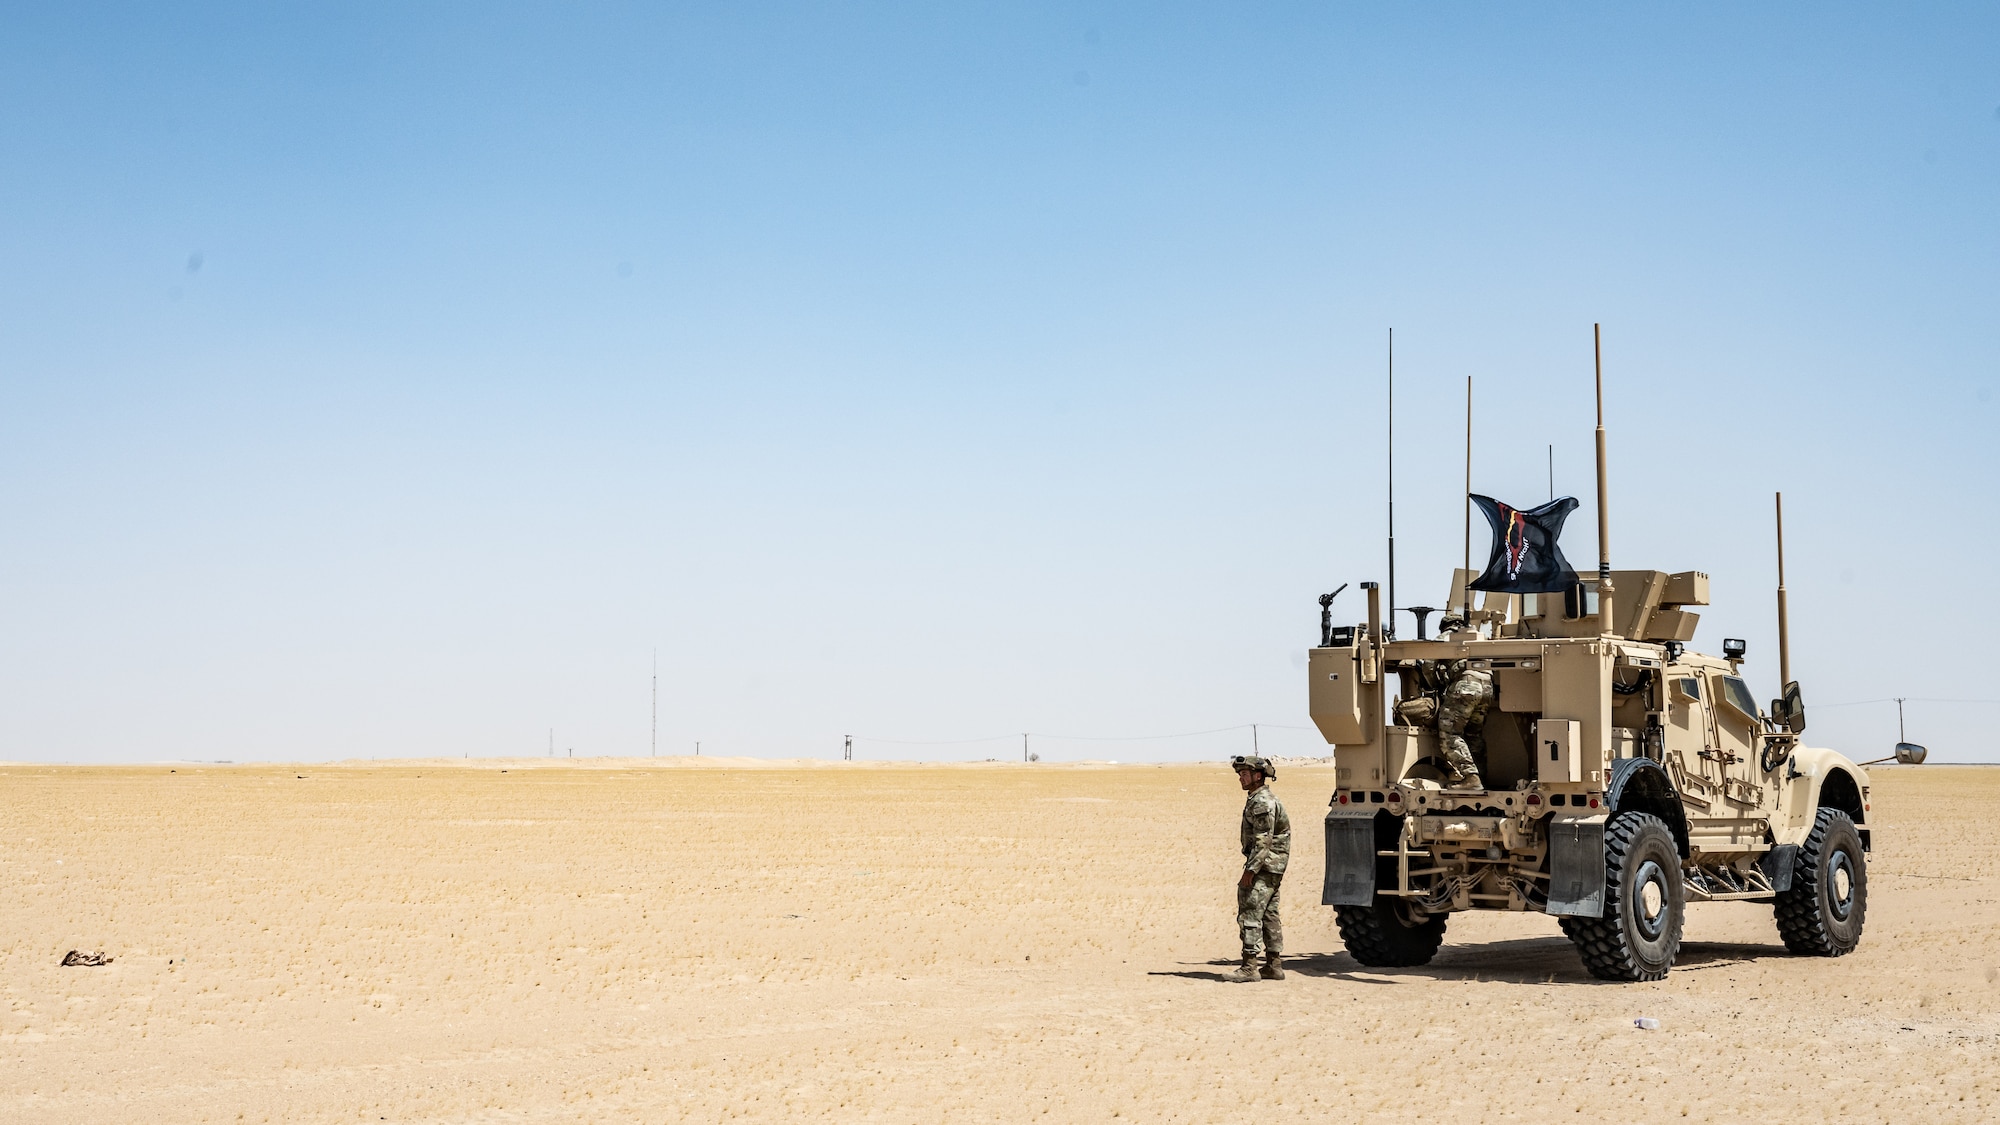 U.S. Air Force Staff Sgt. Bailey Paxson, 386th Expeditionary Security Forces Squadron vehicle control officer, stands next to a Mine Resistant Ambush Protected All-Terrain Vehicle (M-ATV) during vehicle familiarity training at Ali Al Salem Air Base, Kuwait, July 13, 2023. The M-ATV is designed to provide the same levels of protection as the larger and heavier vehicles, but with enhanced mobility in the region’s rough terrain. (U.S. Air Force photo by Staff Sgt. Kevin Long)